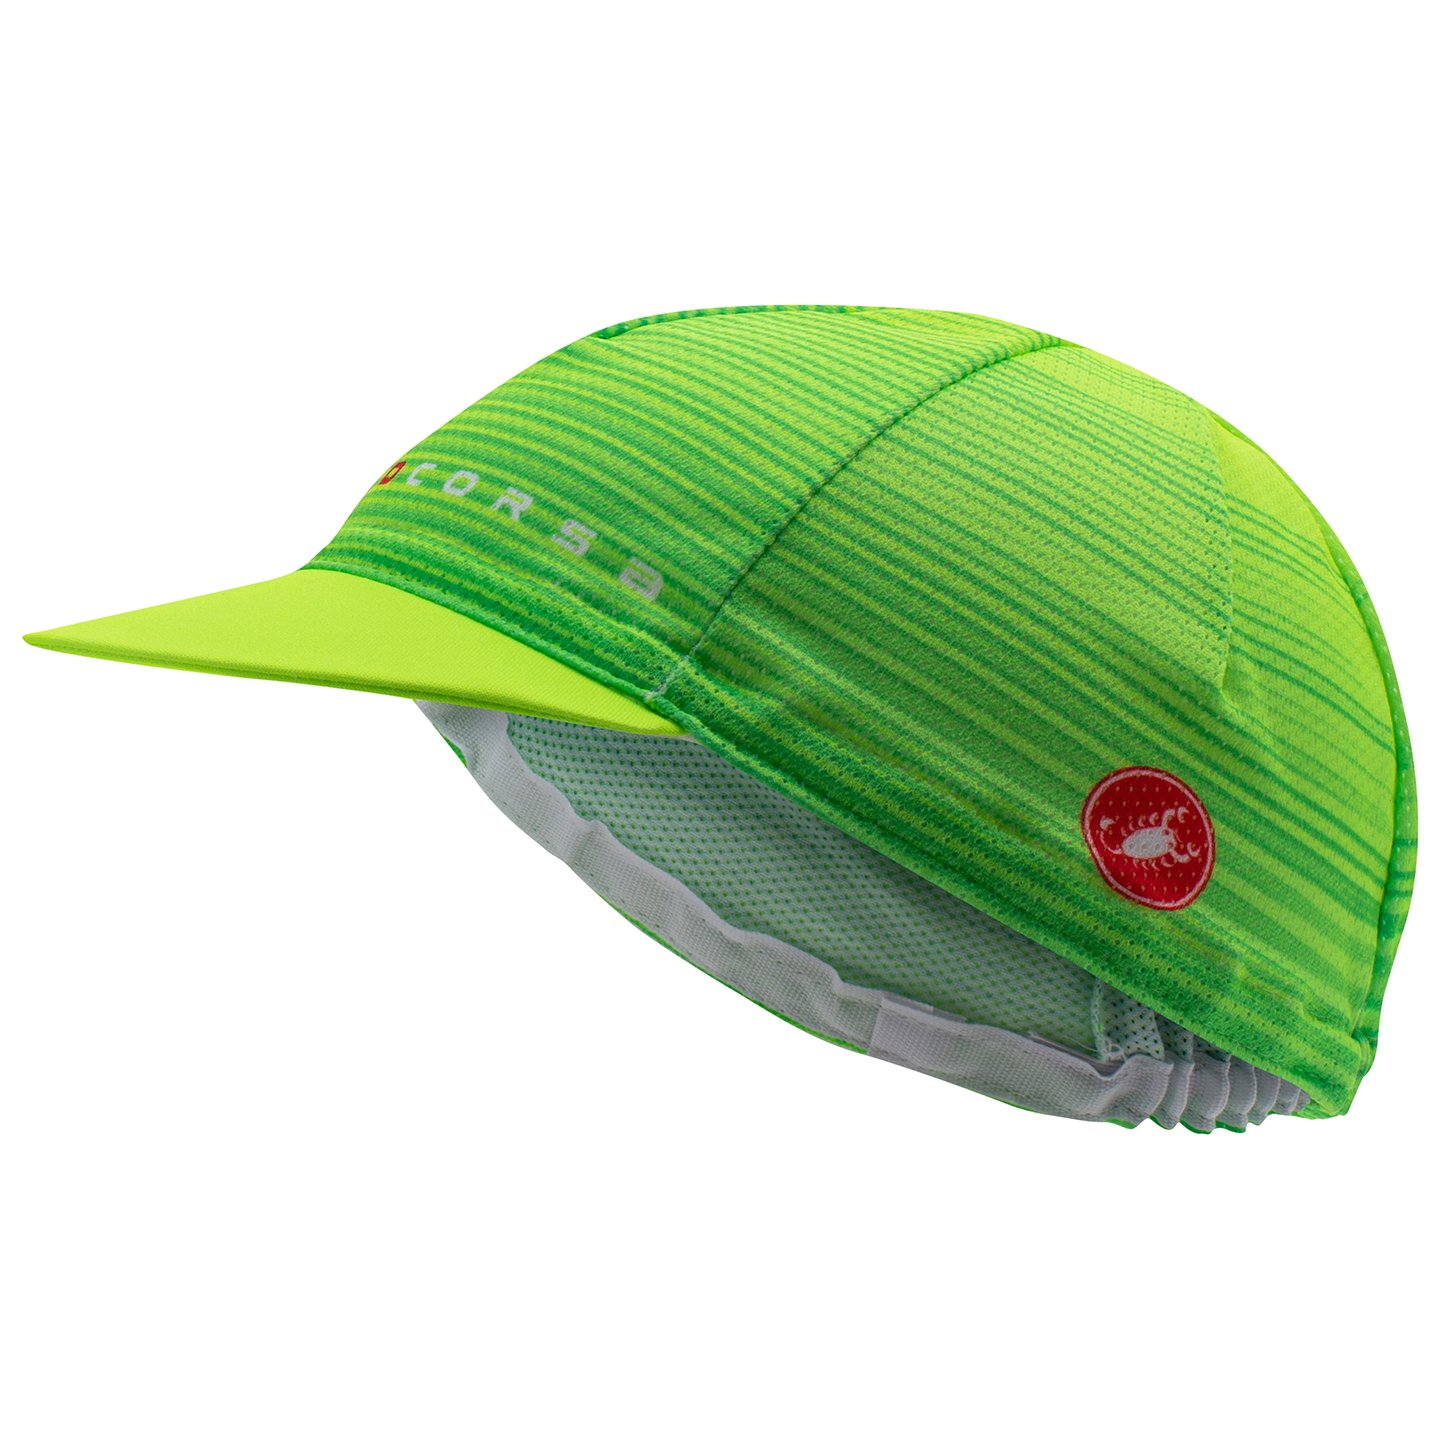 CASTELLI Rosso Corsa Cycling Cap Peaked Cycling Cap, for men, Cycling clothing